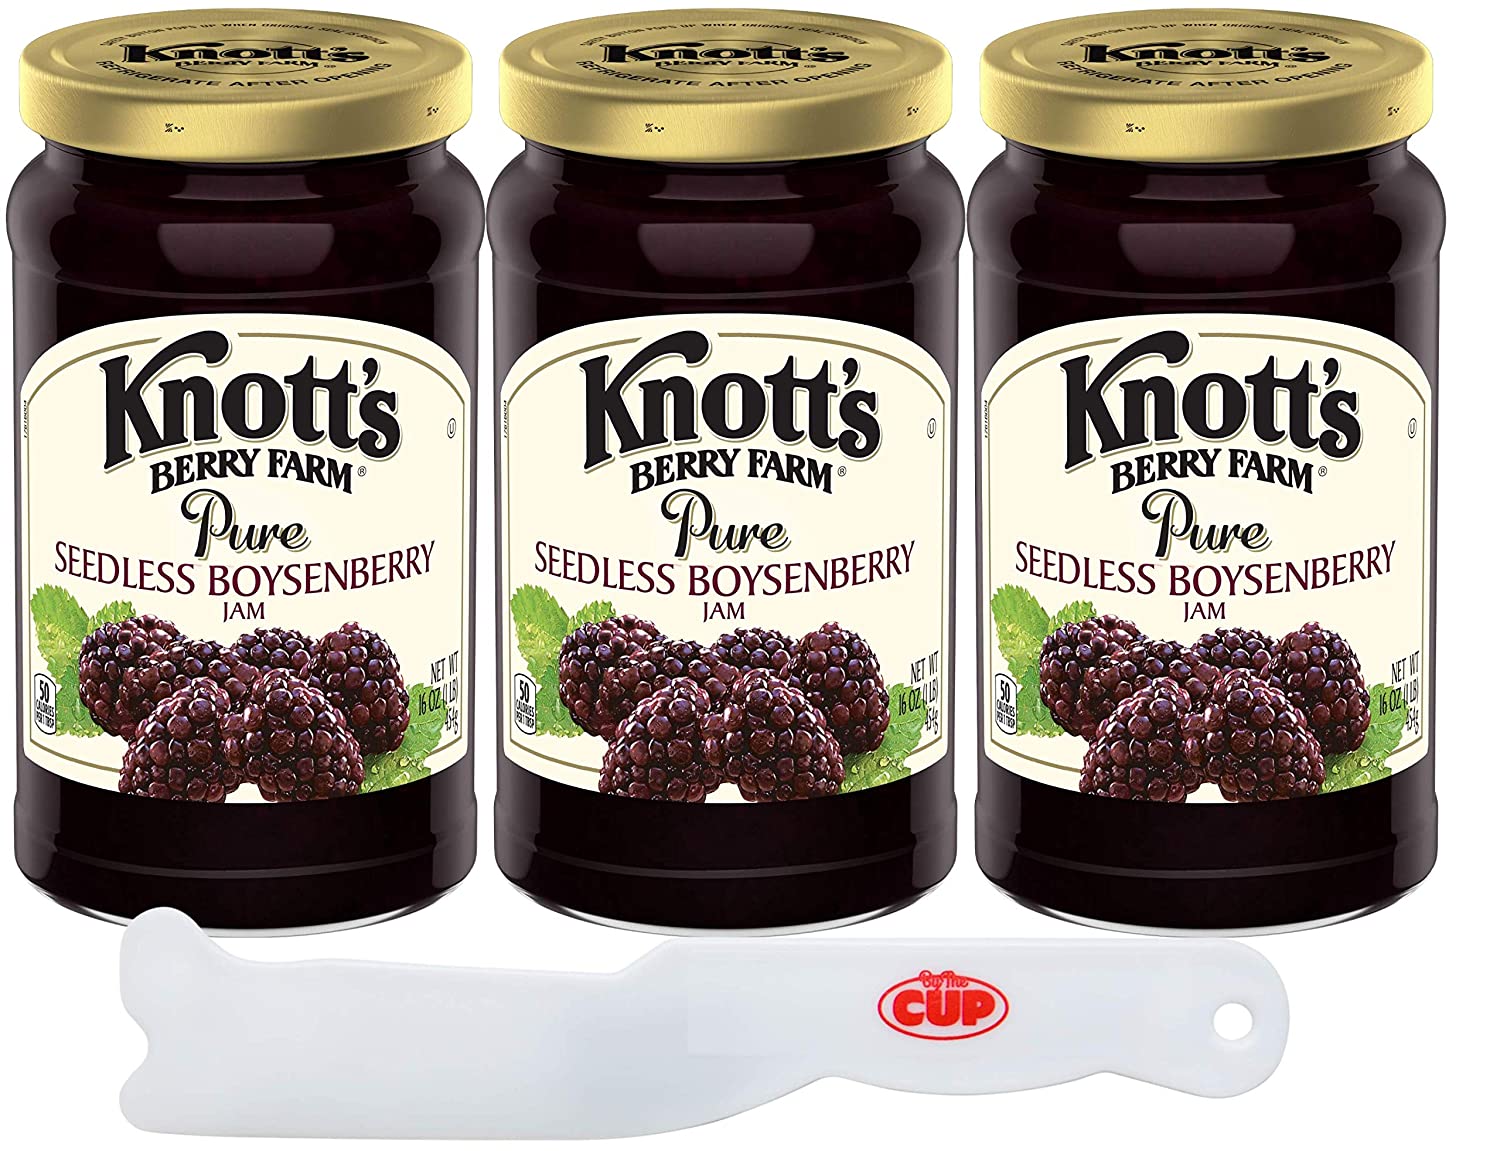 Knott's Berry Farm Pure Seedless Boysenberry Jam 16 Ounce Jar (Pack of 3) with By The Cup Spreader